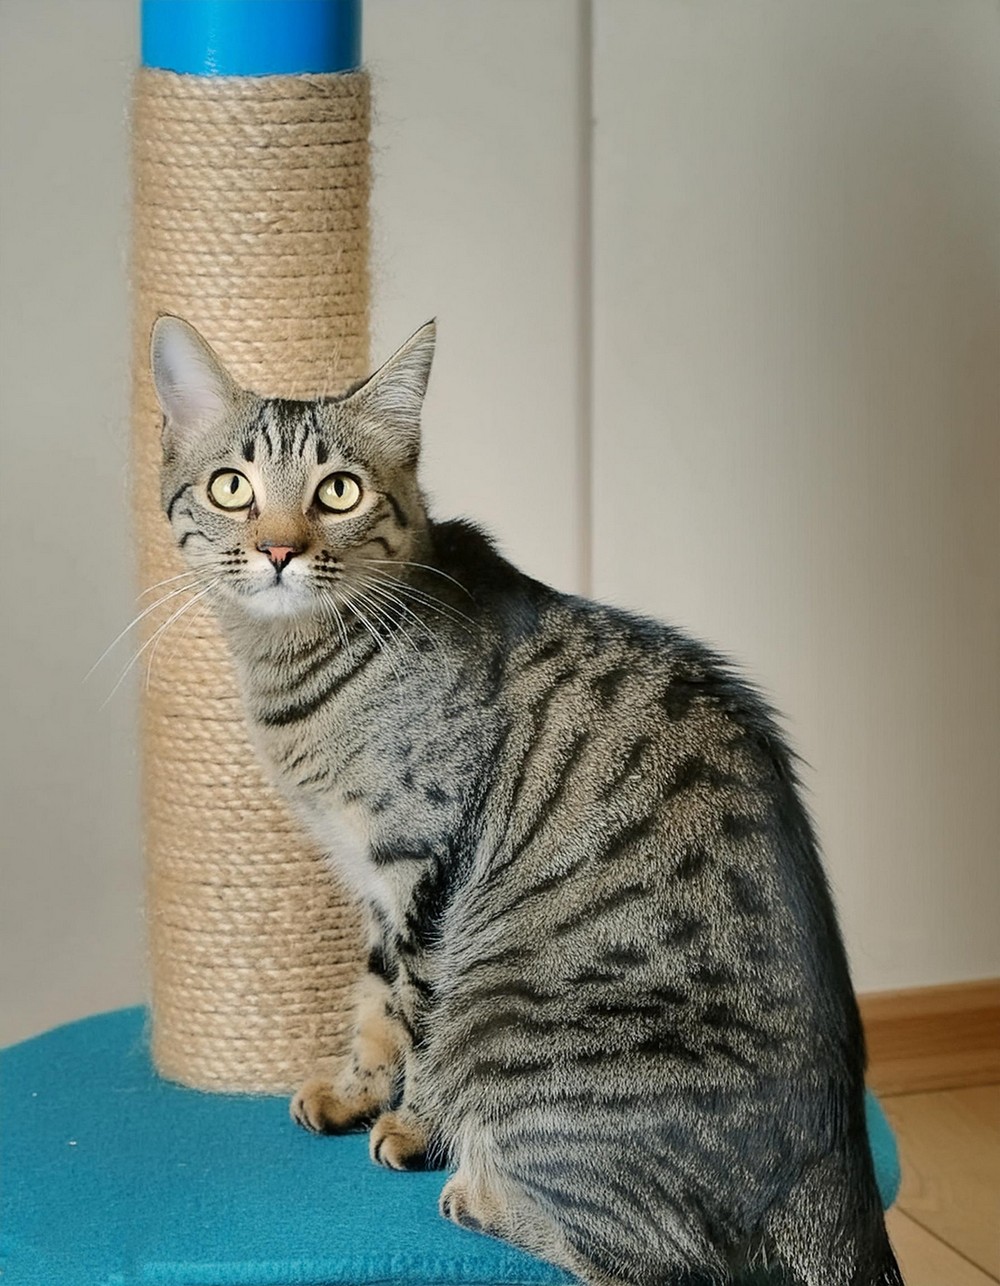 Cat Scratching Post Tower